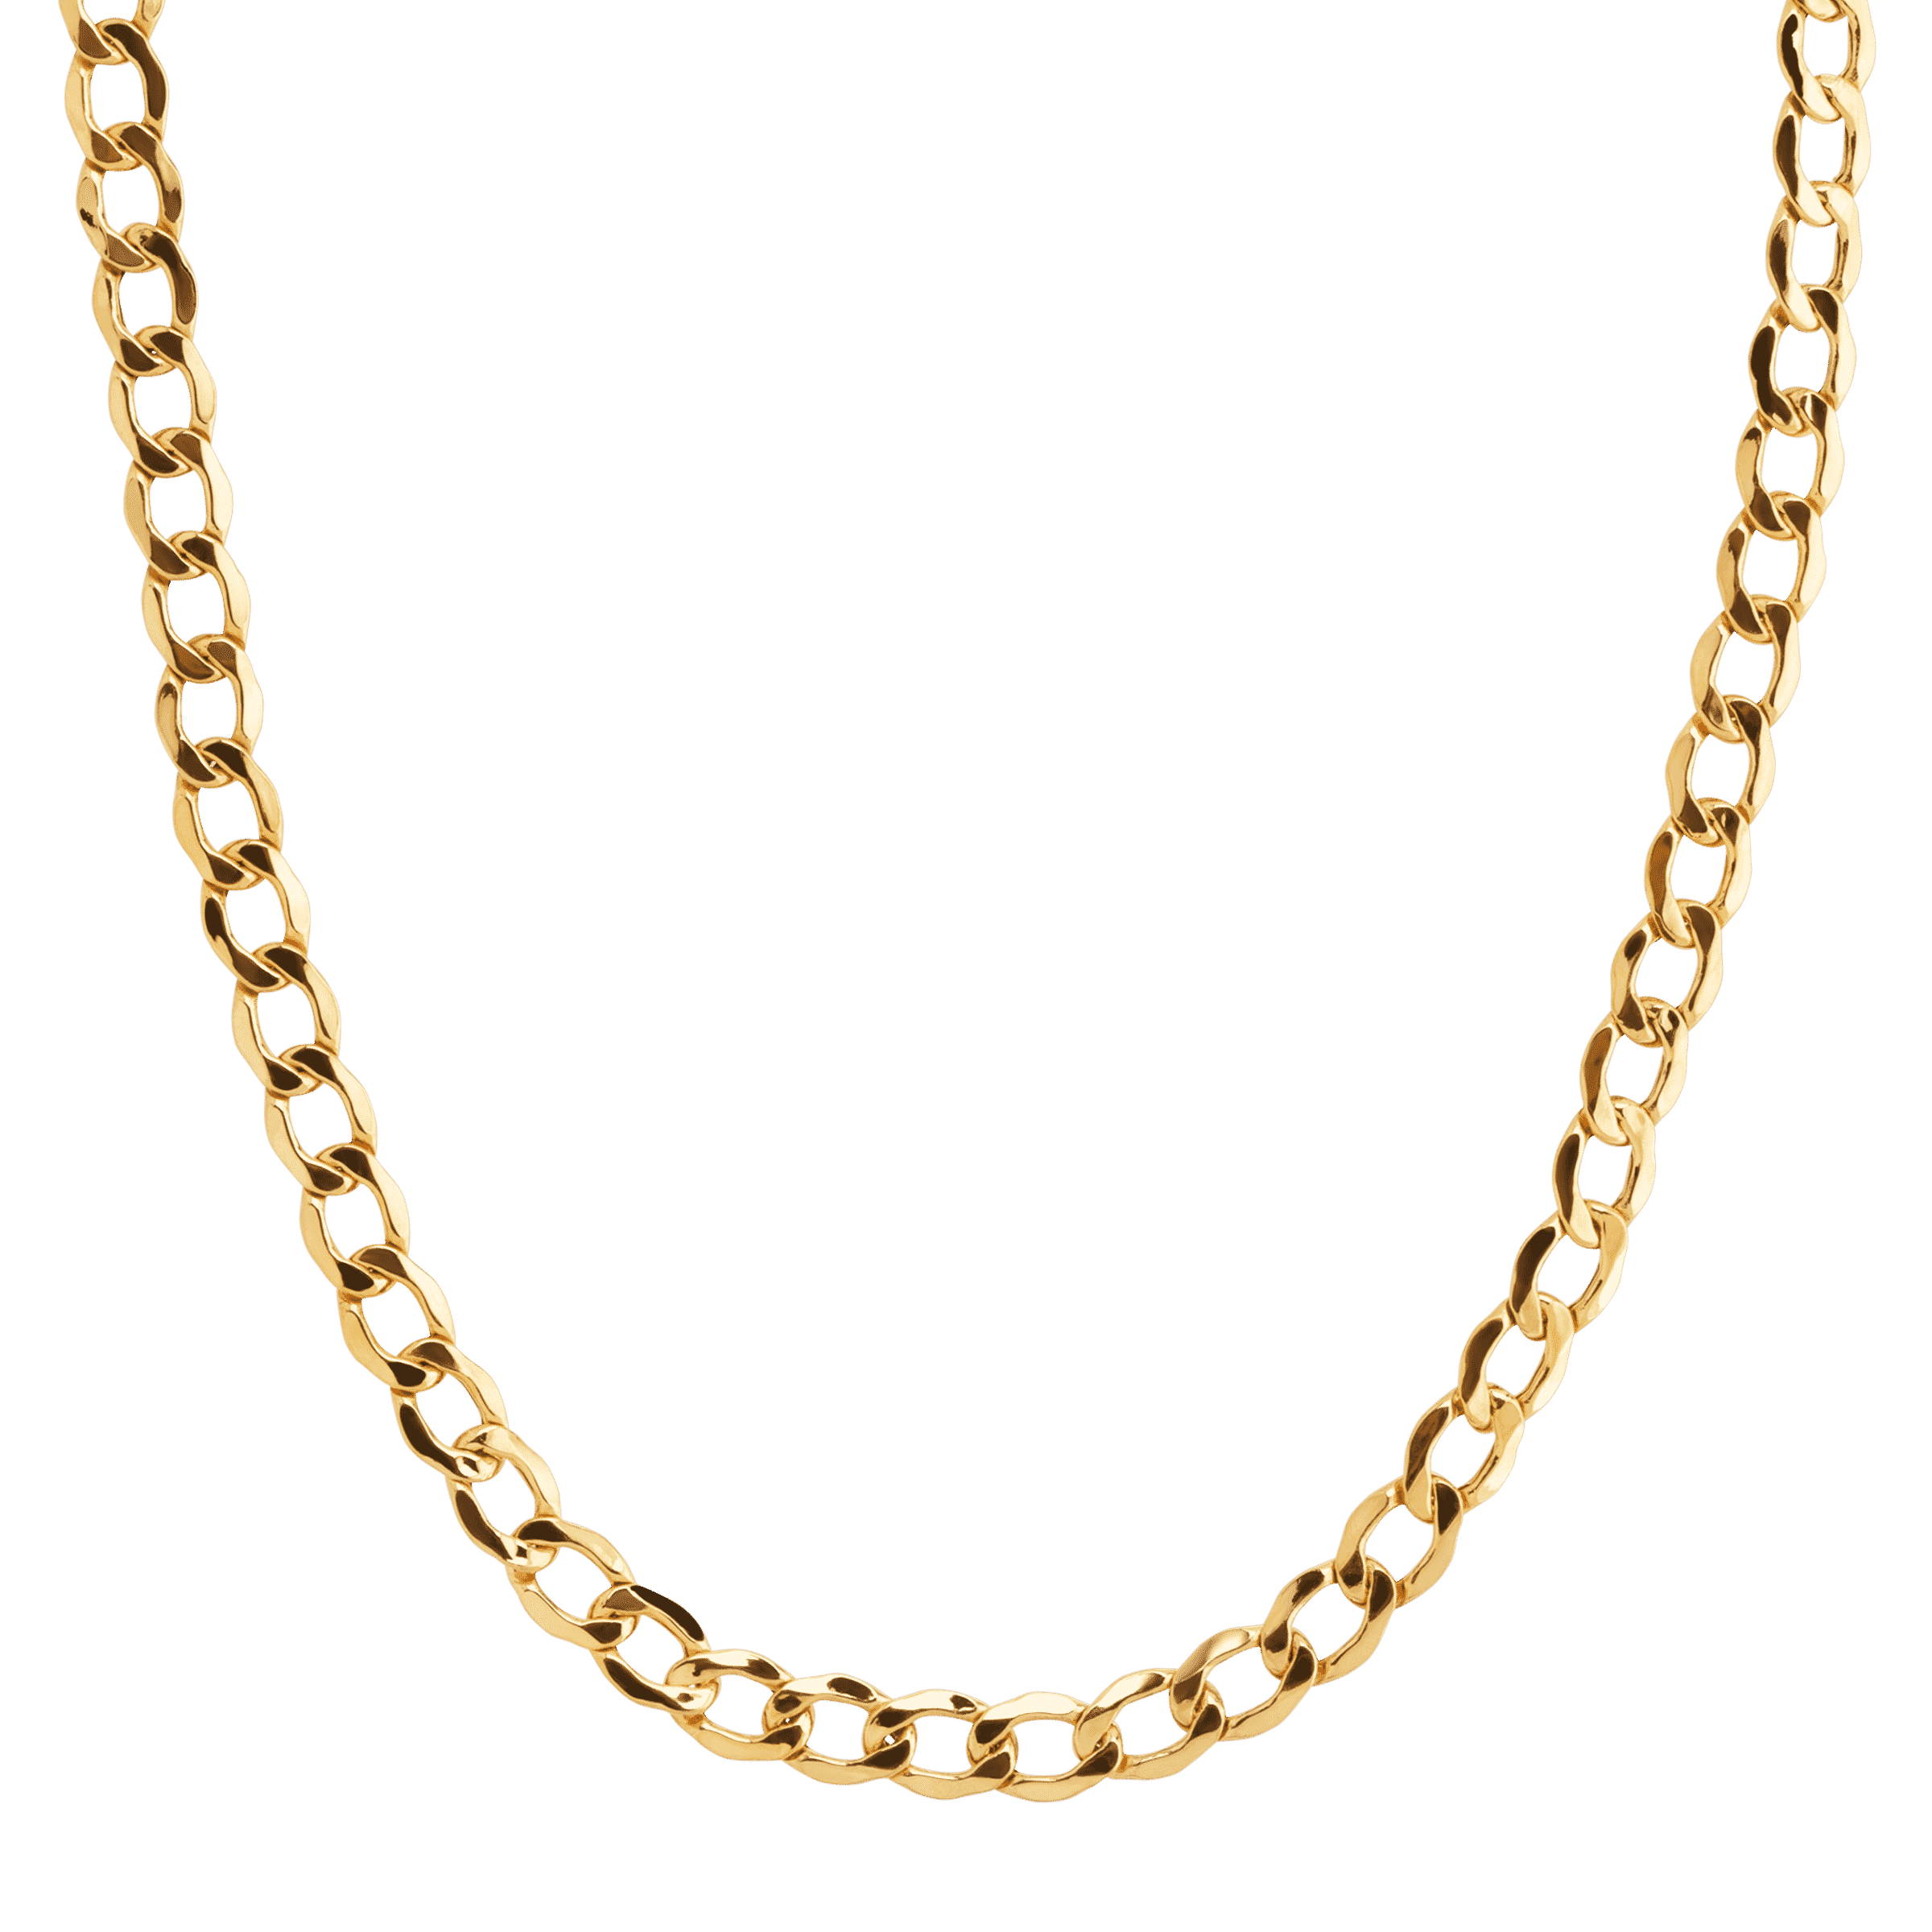 Pre-owned Welry Men's 5.1mm Beveled Curb Chain Necklace In 14k Yellow Gold